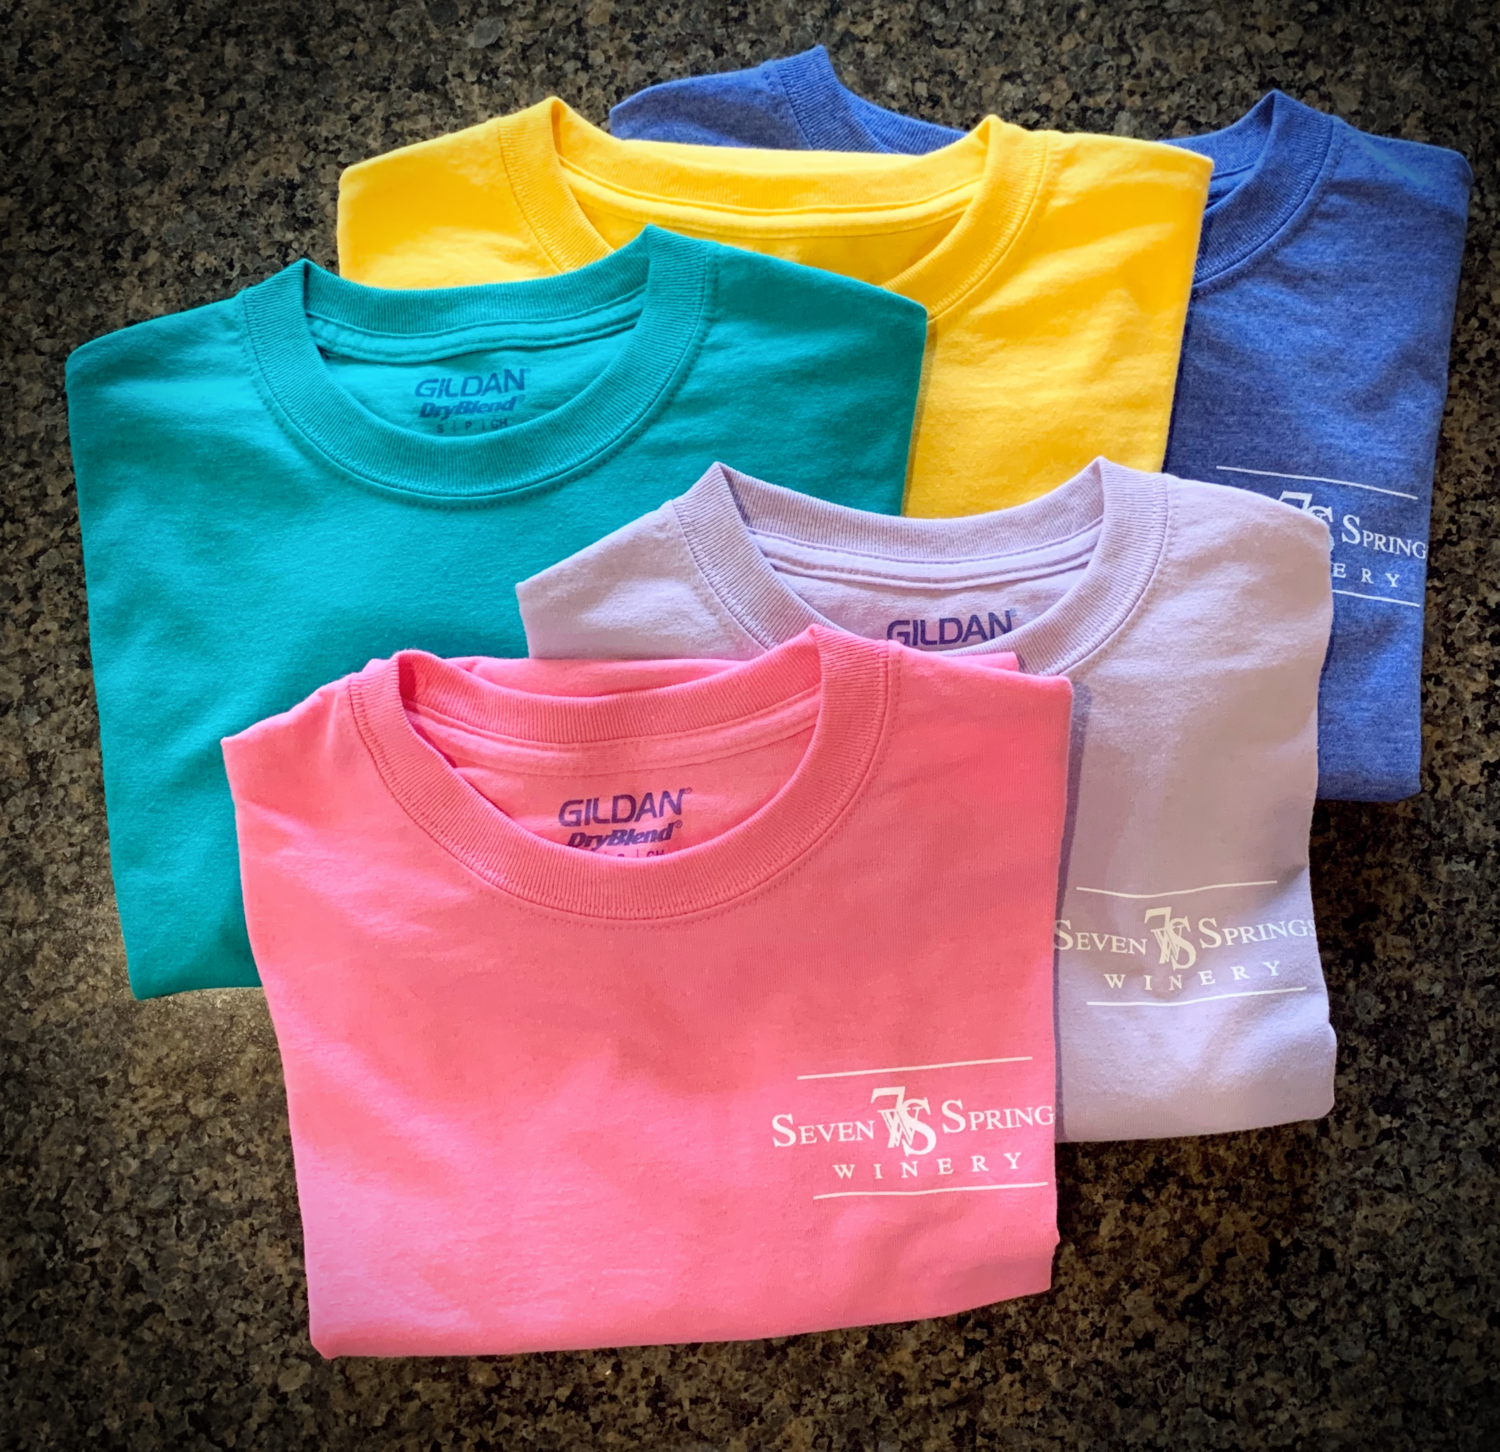 Seven Springs Winery T-Shirt